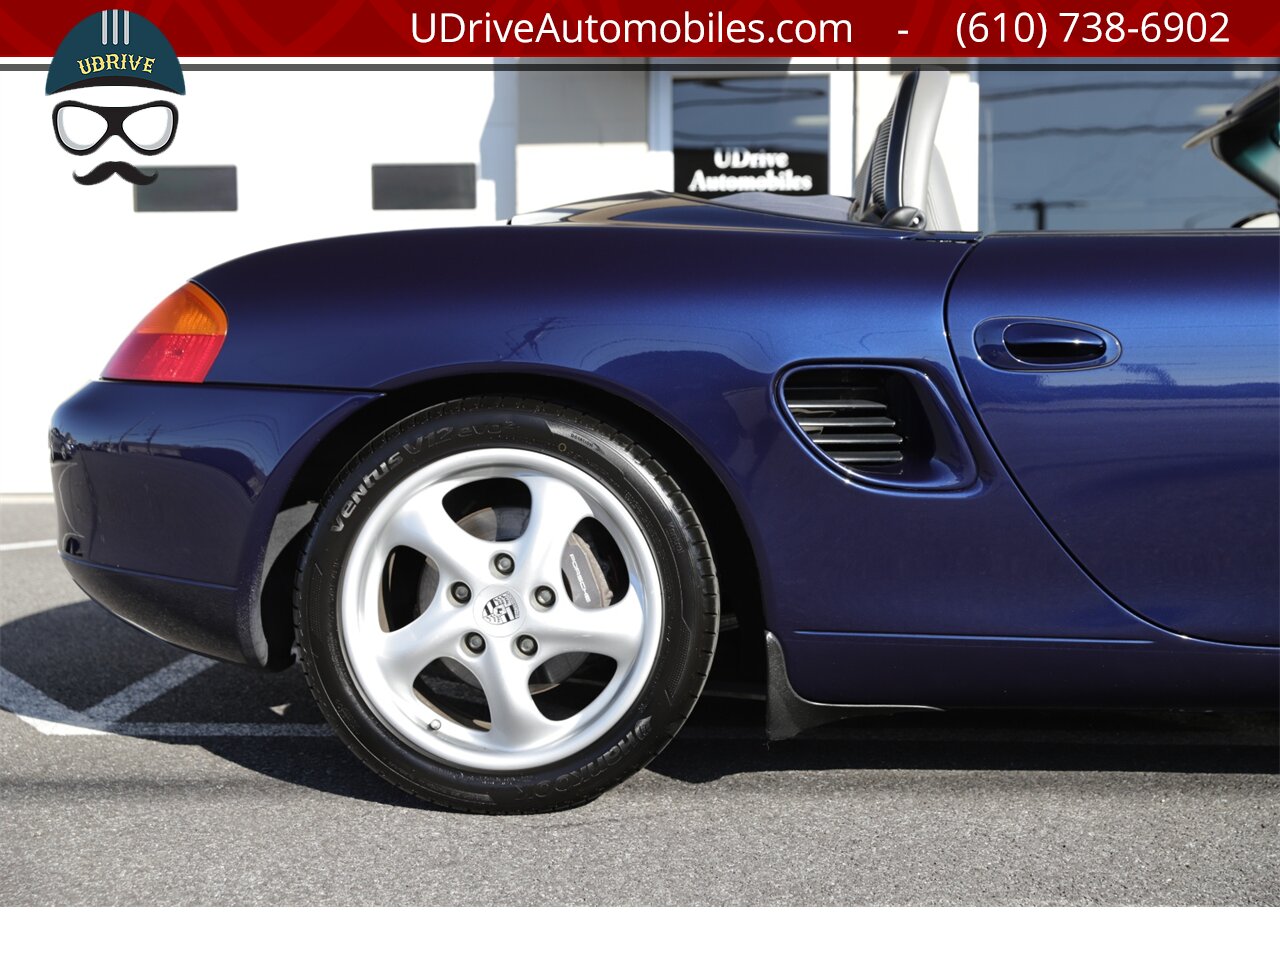 2001 Porsche Boxster 5 Speed Manual Detailed Service History  Same Owner for Last 18 Years Hard Top Included - Photo 14 - West Chester, PA 19382